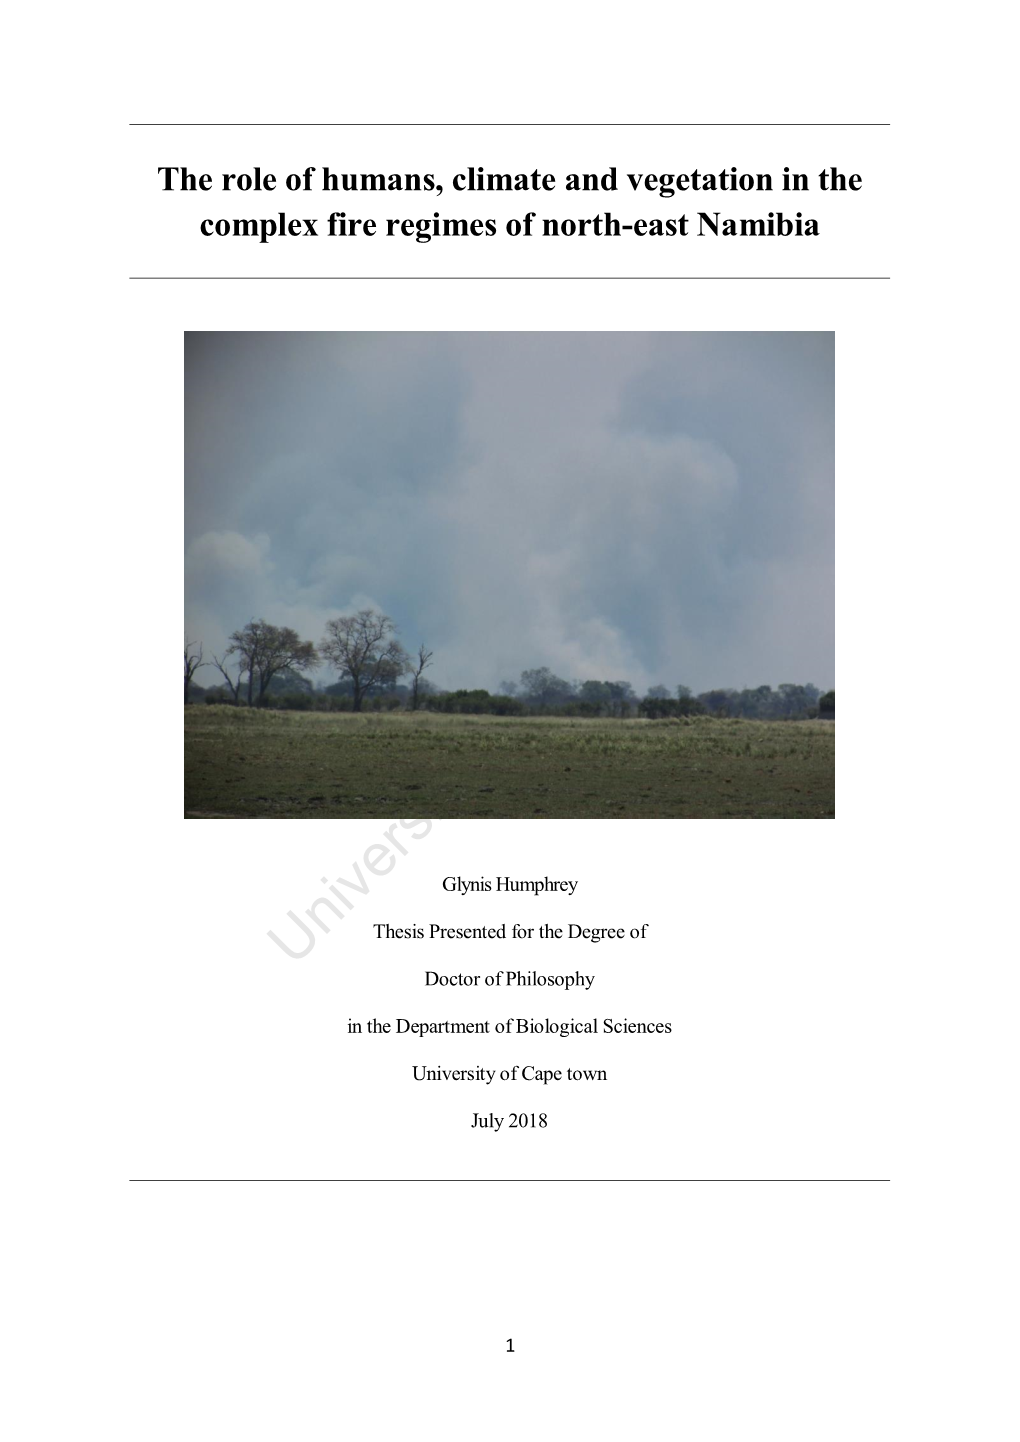 The Role of Humans, Climate and Vegetation in the Complex Fire Regimes of North-East Namibia